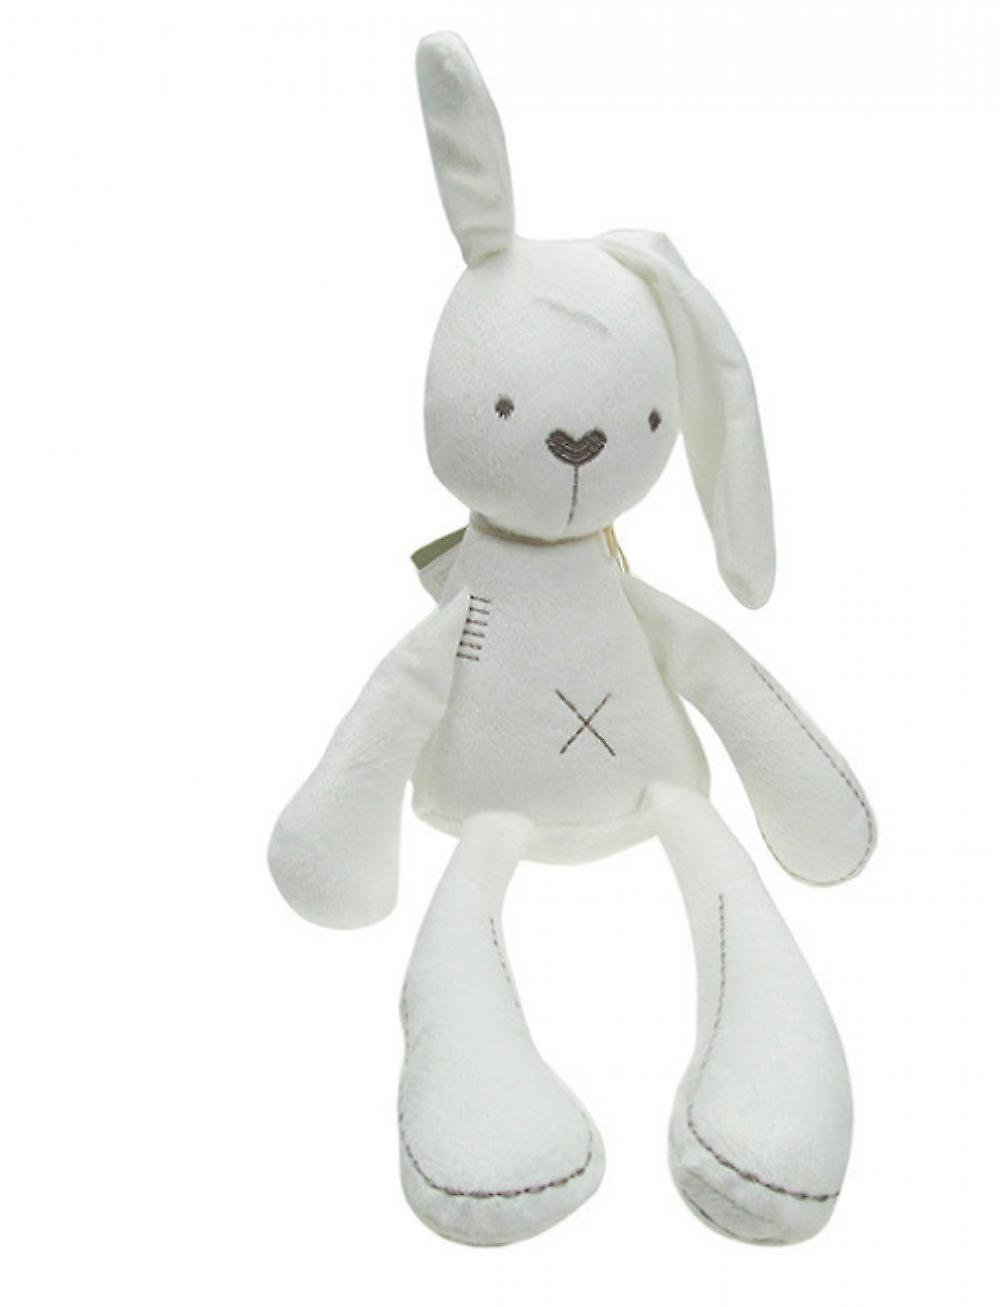 Soft Snuggle Bunny Plush Childs First Bubby Doll Cotton And Natural Color